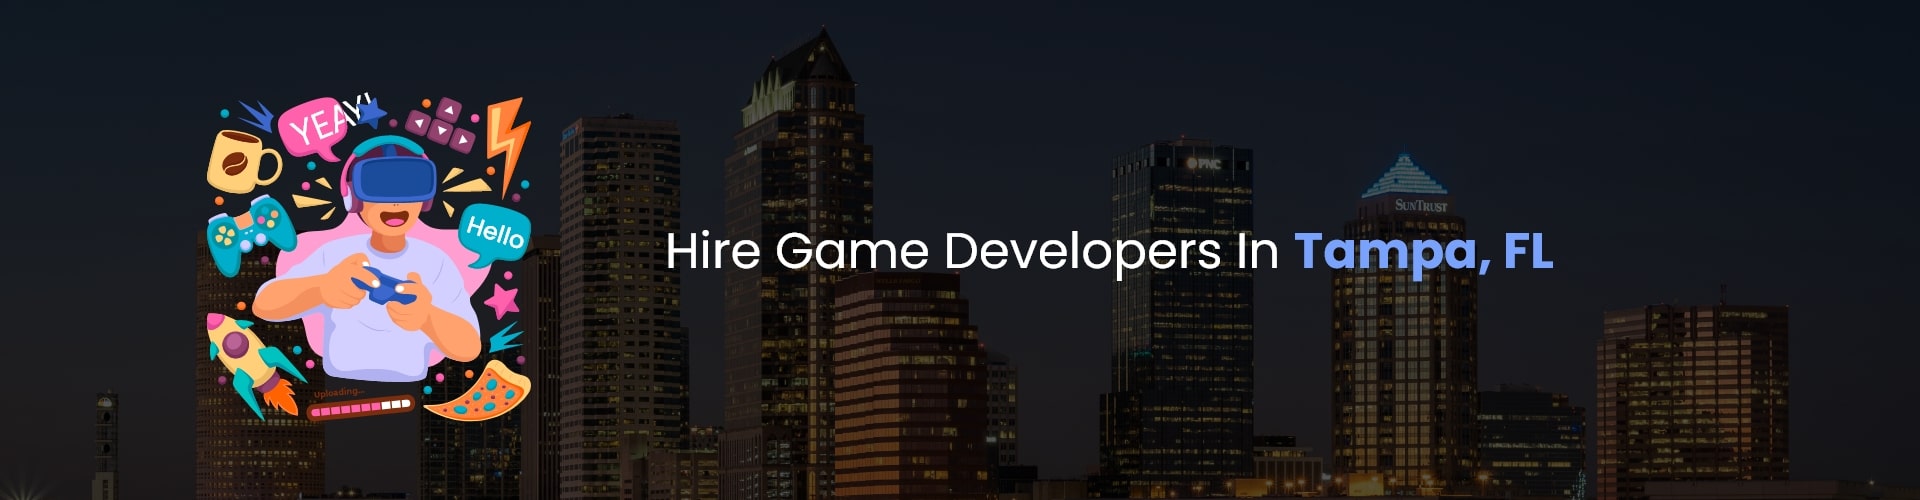 hire game developers in tampa